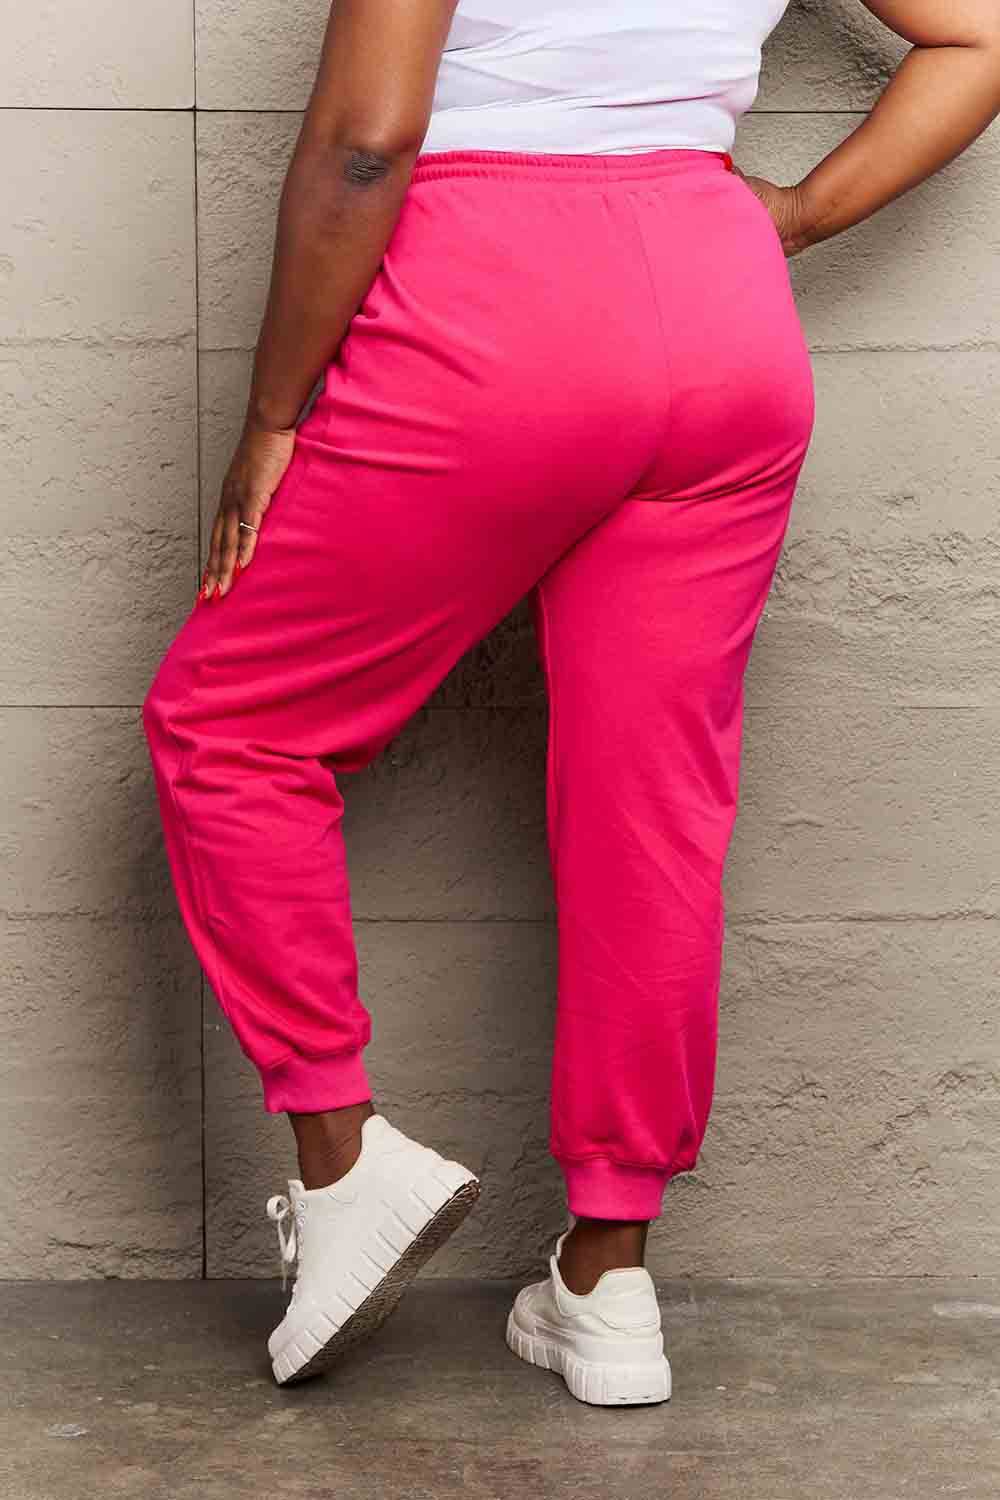 Simply Love Full Size PINK Graphic Sweatpants